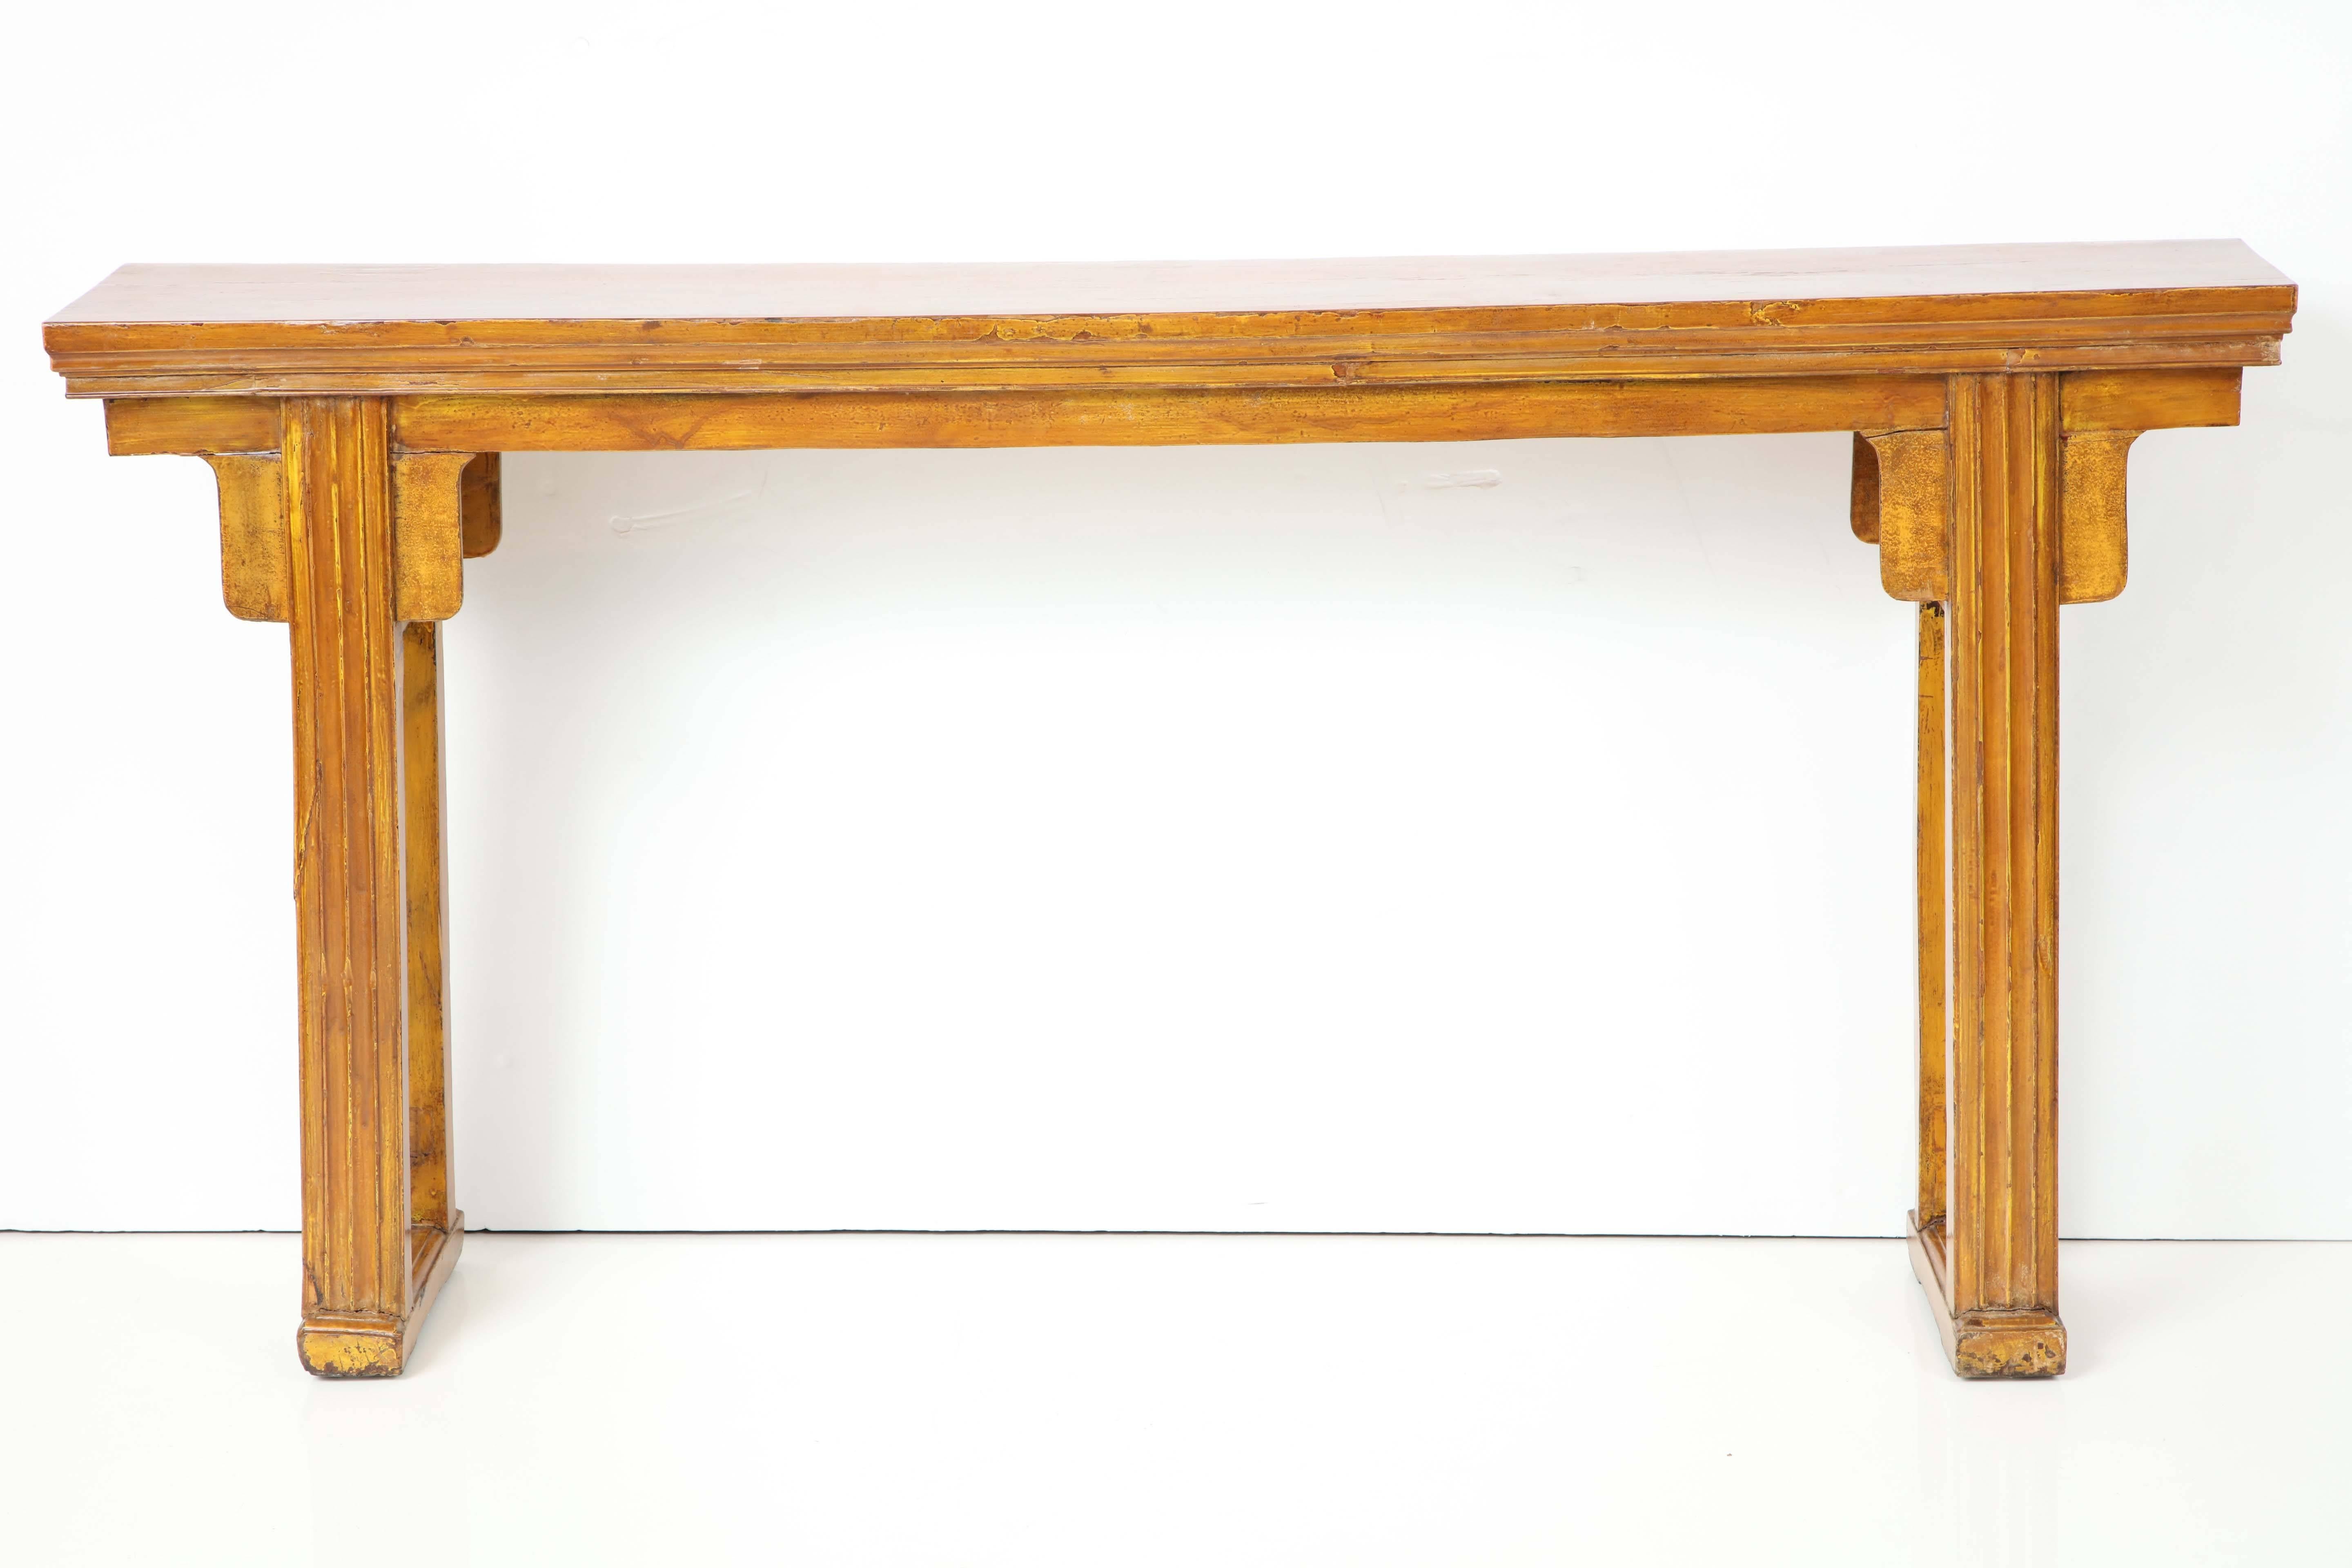 A Chinese yellow lacquered console, late 19th century, with a rectangular top raised on straight channeled supports and joined by a cross support base. Old lacquer finish with a new clear over lacquer. 

This table has very elegant proportions